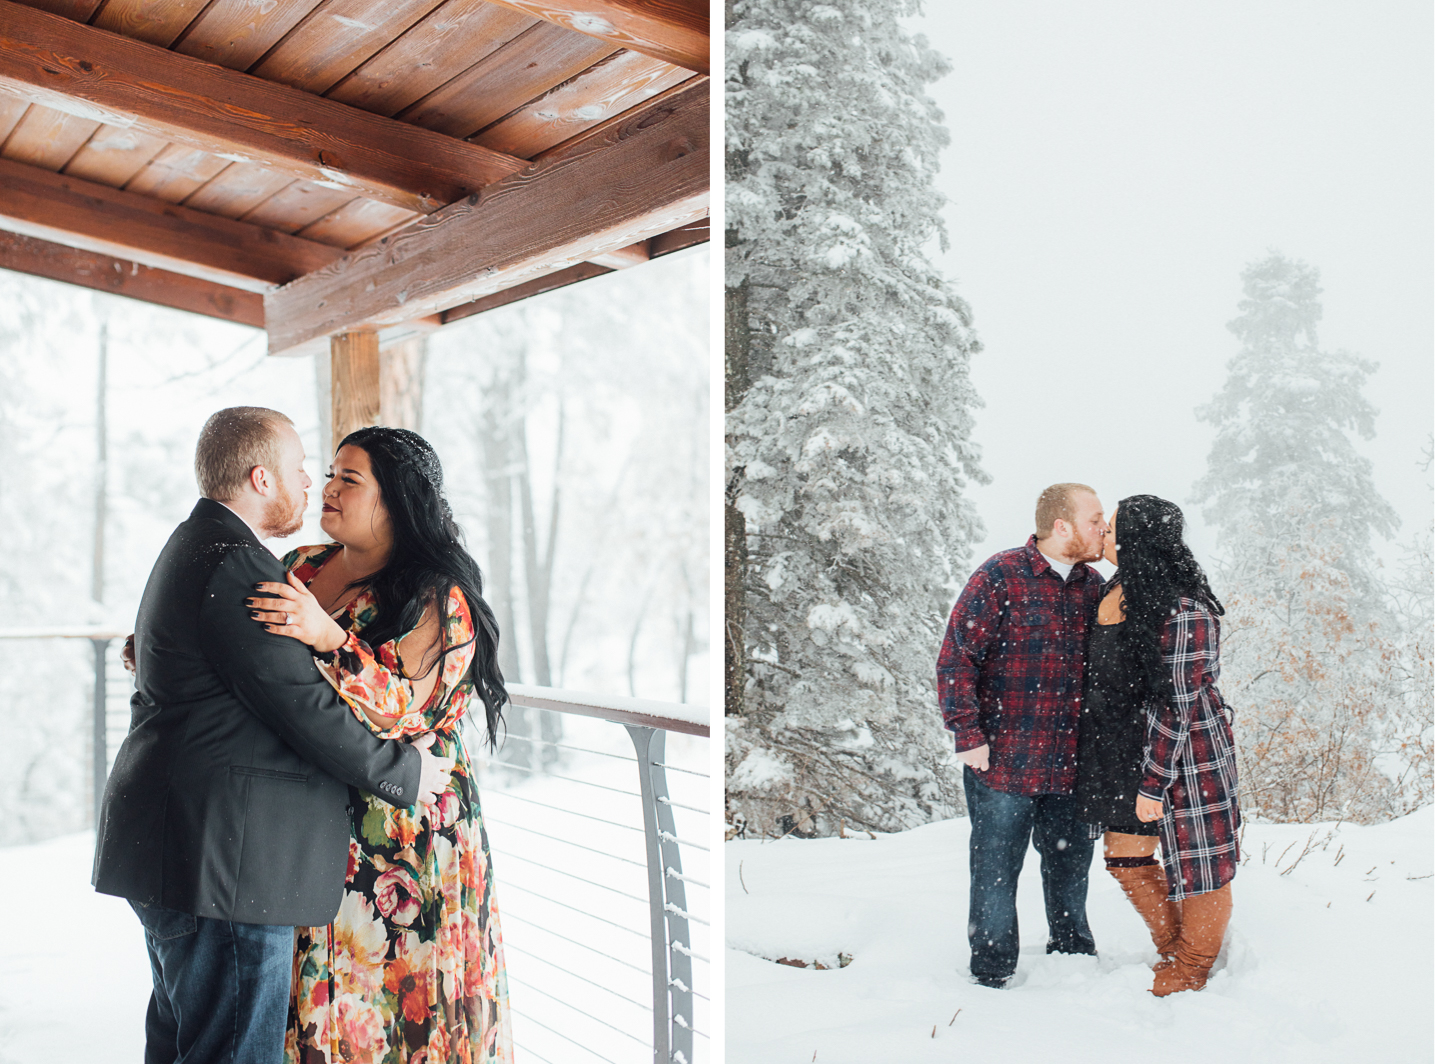 alexa-and-randy-snowy-engagement-session-9